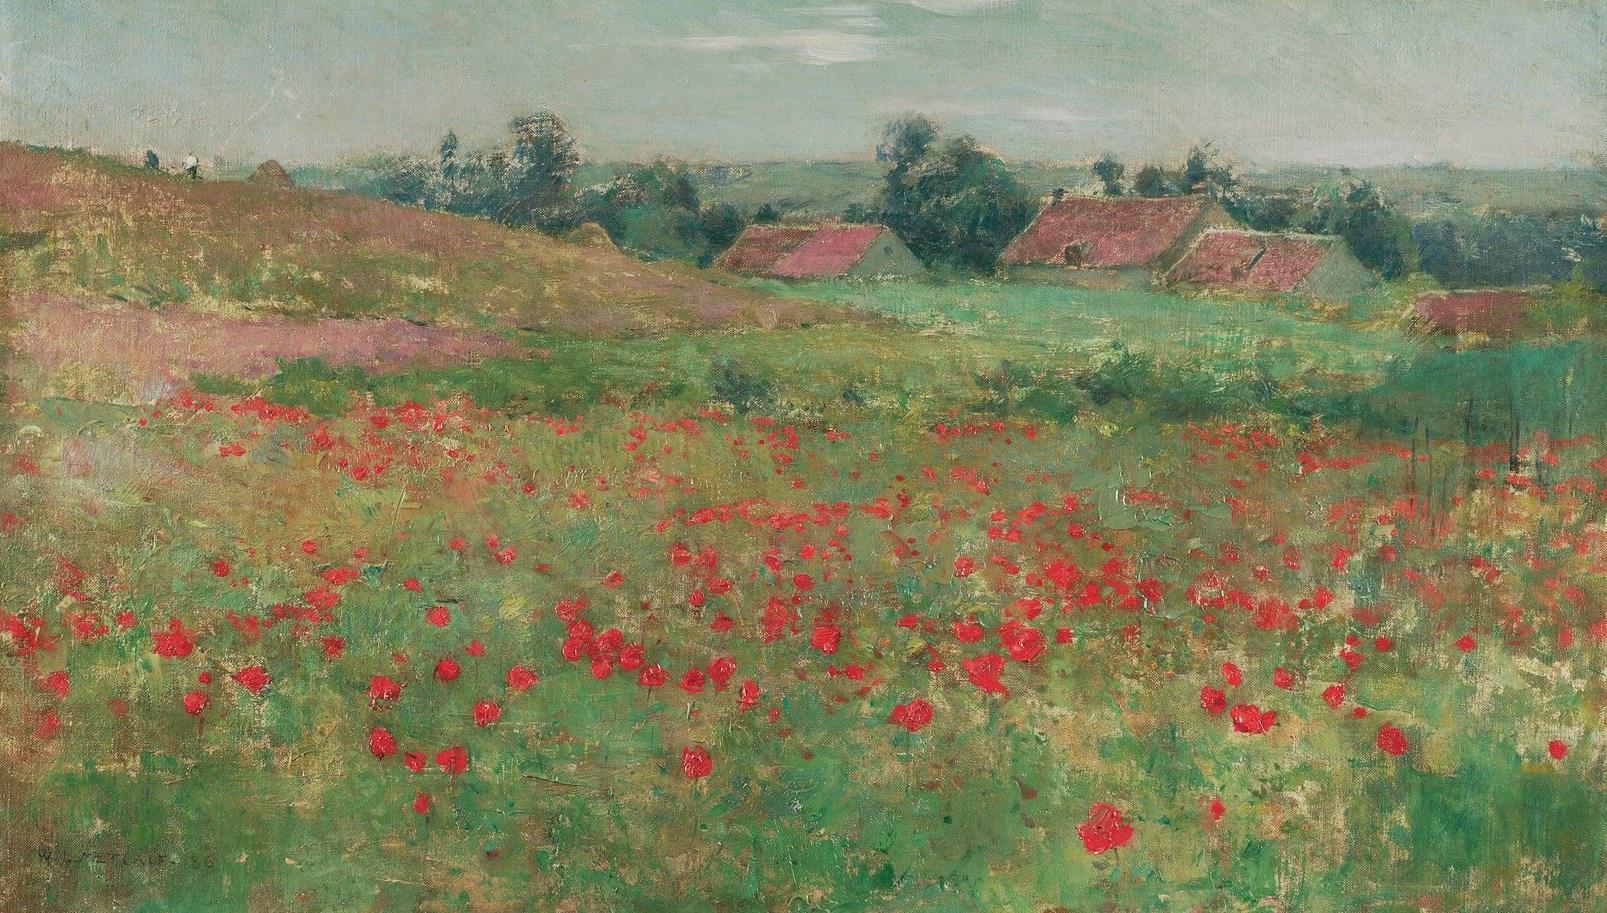 Poppy Field, Willard Metcalf, Oil on Canvas, 10 5/8 x 18 5/6 in., Collection of J. Jeffrey and Ann Marie Fox